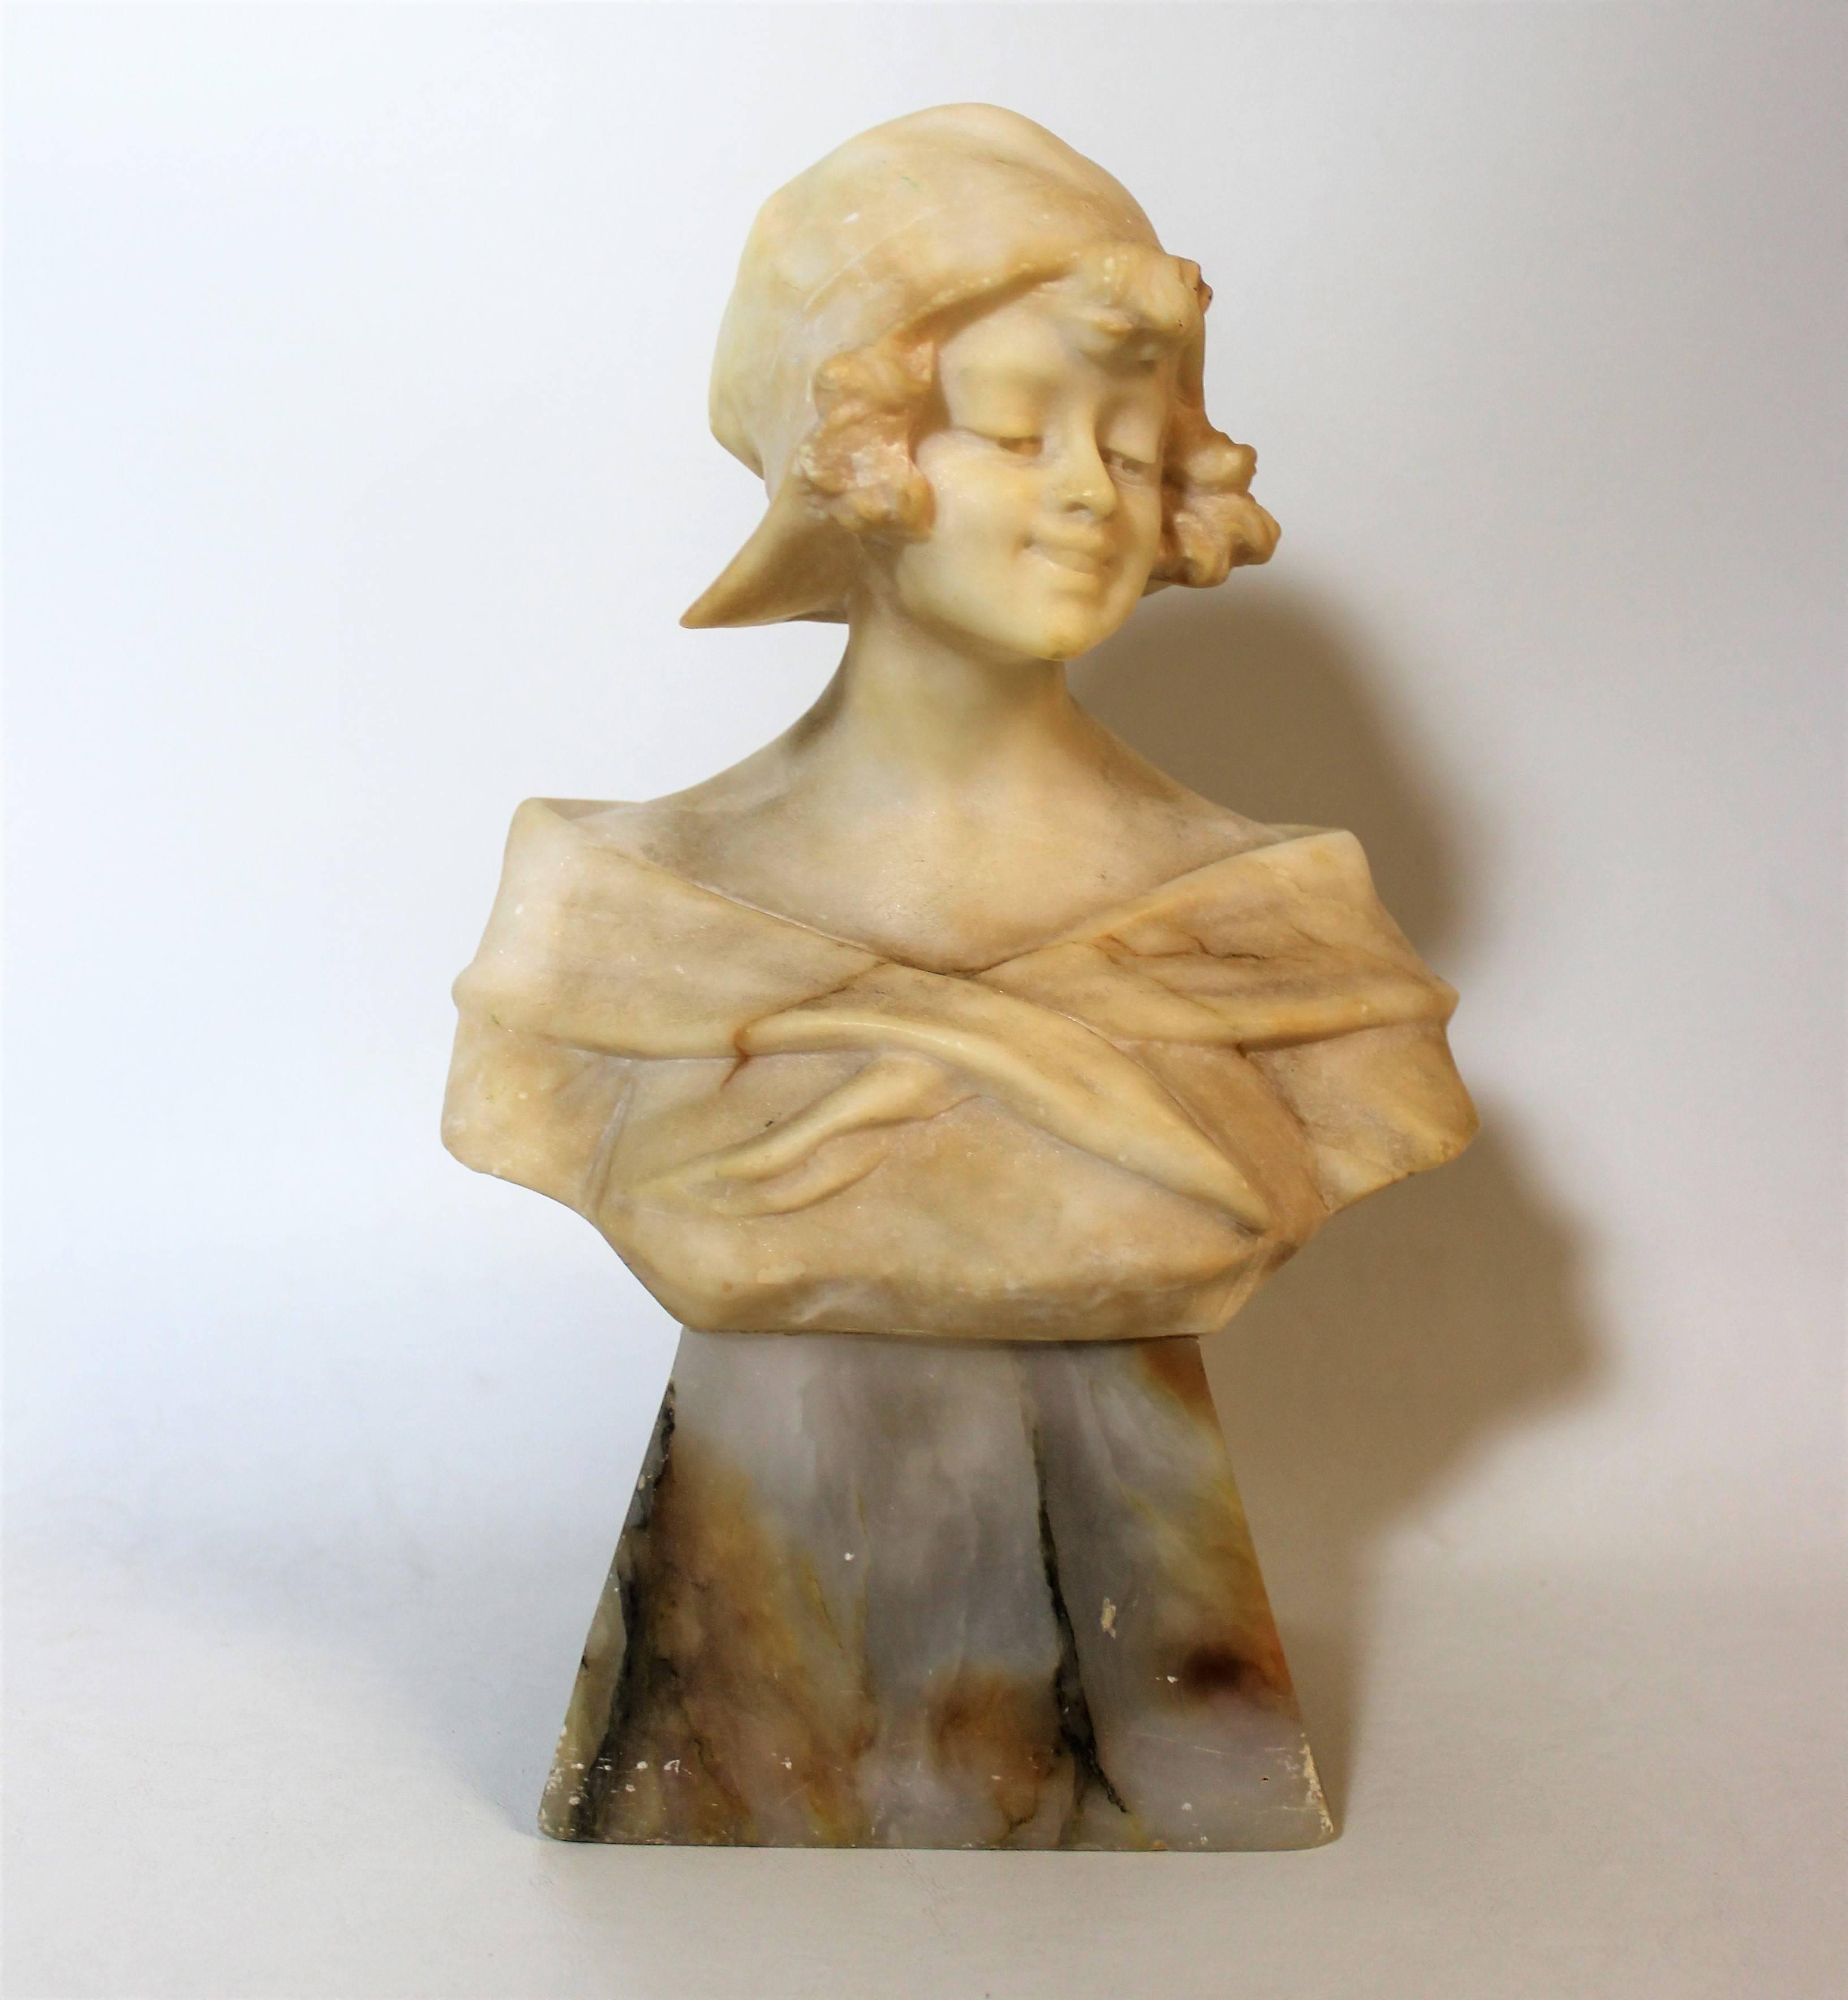 Beautiful alabaster sculpture of an Art Nouveau lady resting on a marble plinth. Signed R. Schoggi.